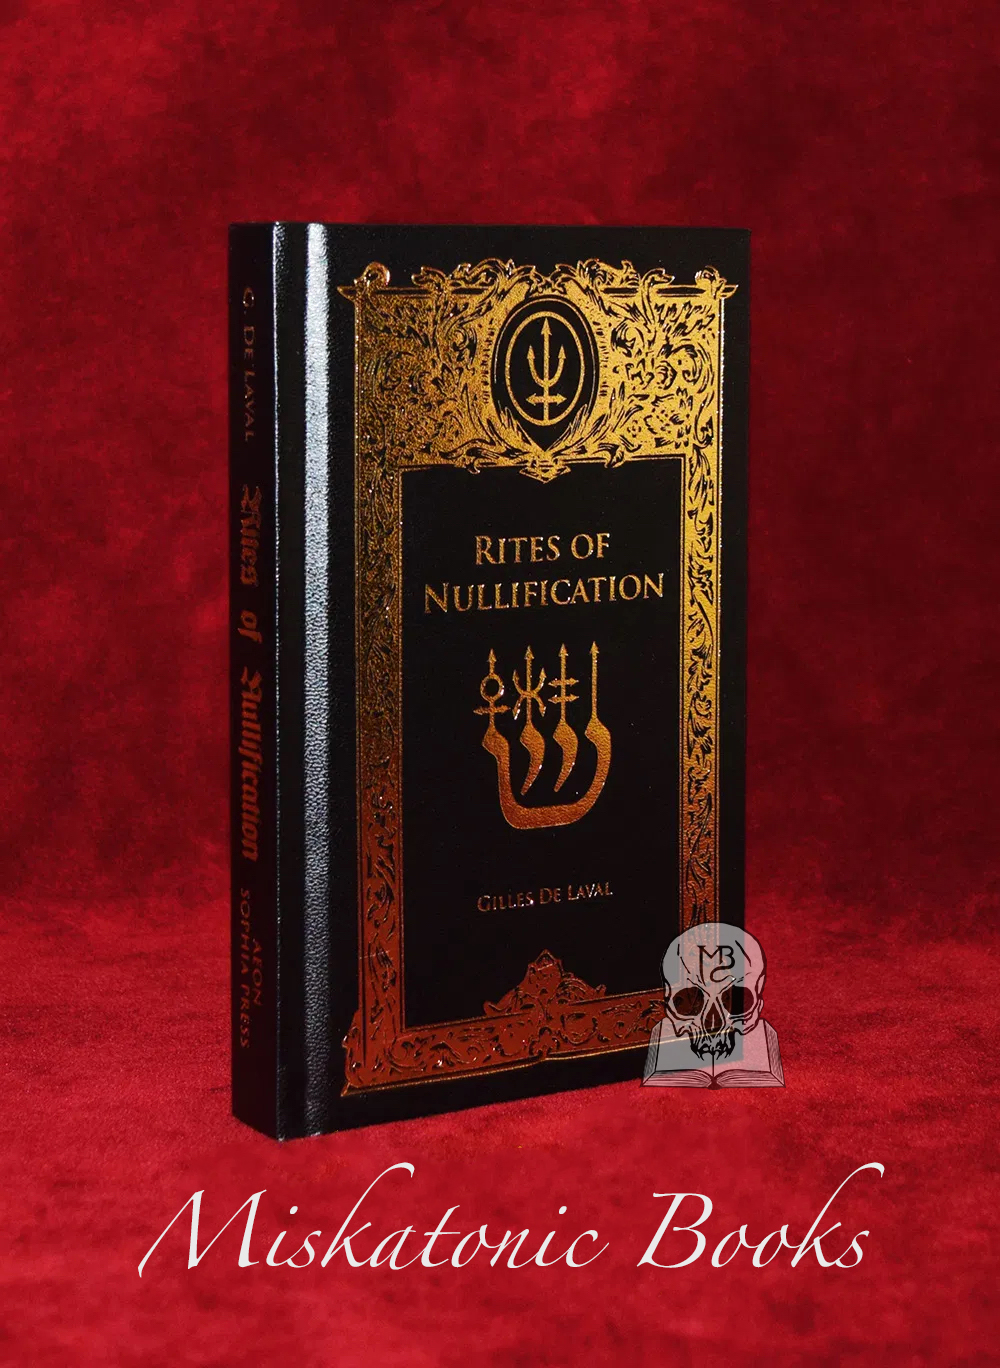 RITES OF NULLIFICATION by G. de Laval - DELUXE Leather Bound Limited Edition Hardcover